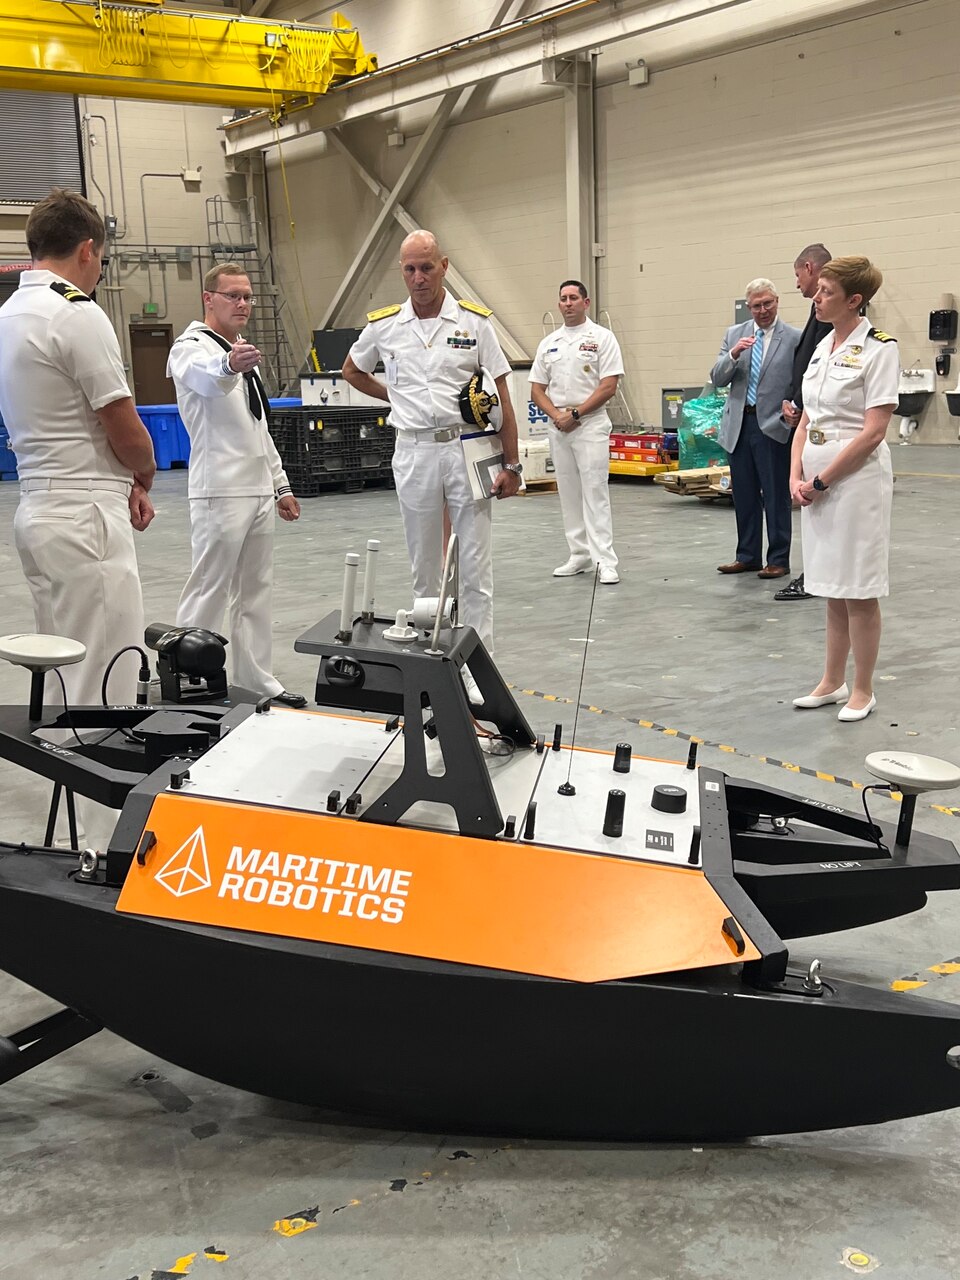 STENNIS SPACE CENTER, Miss.— U.S. Naval Meteorology and Oceanography Command hosted representatives from the Italian Hydrographic Institute (IIM) for a tour of commands and familiarization of operational capabilities, July 22, 2022.